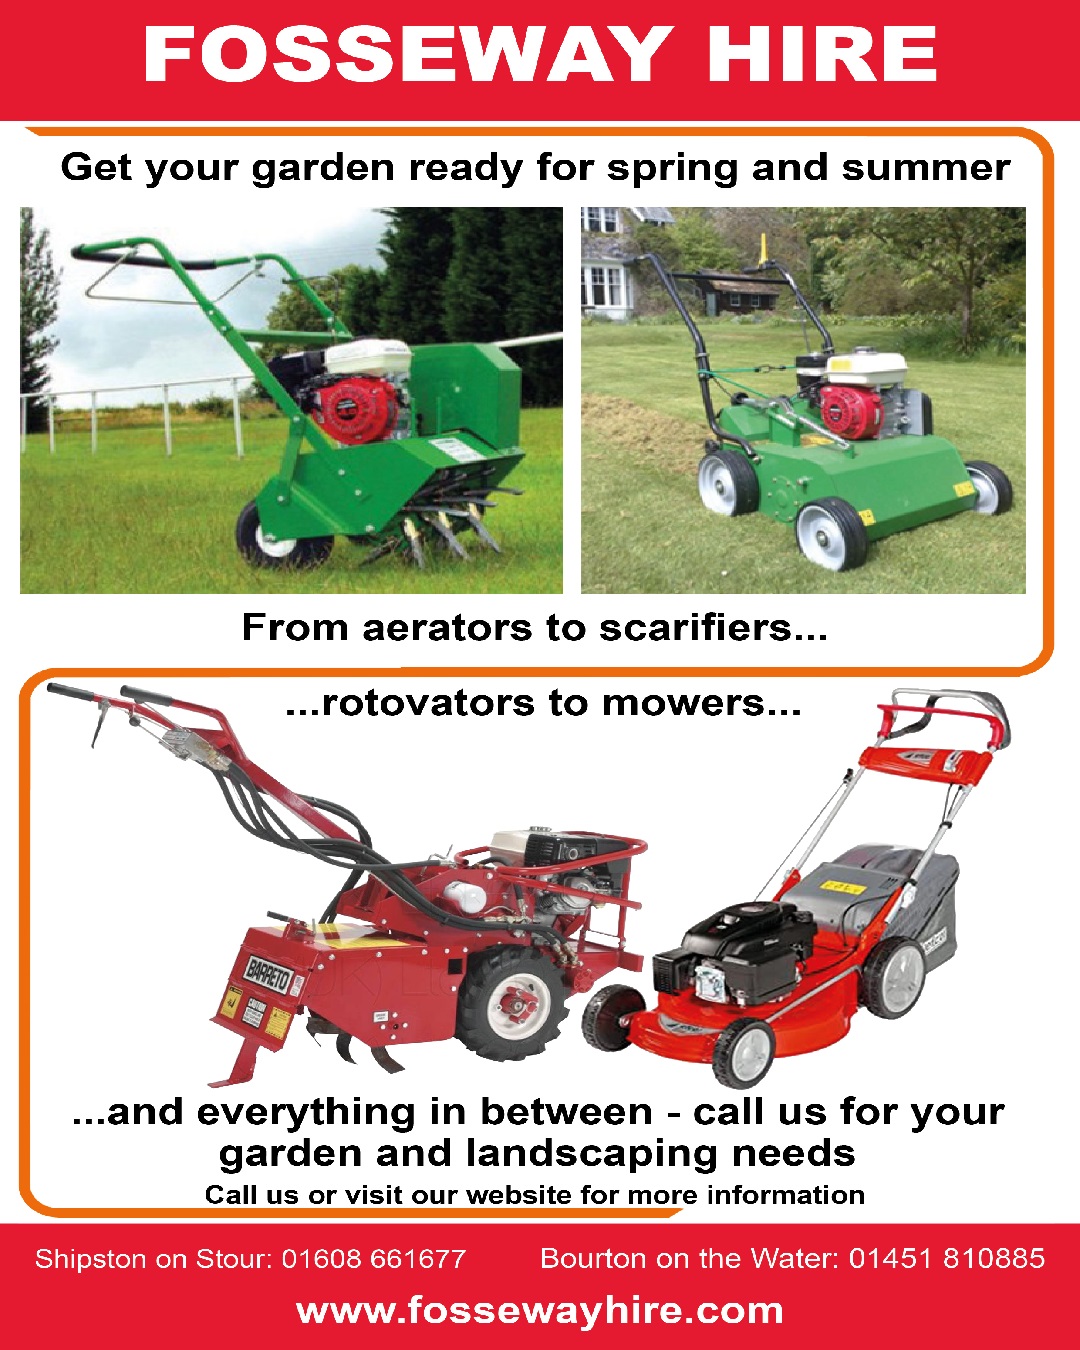 Garden machinery hire is really busy now!